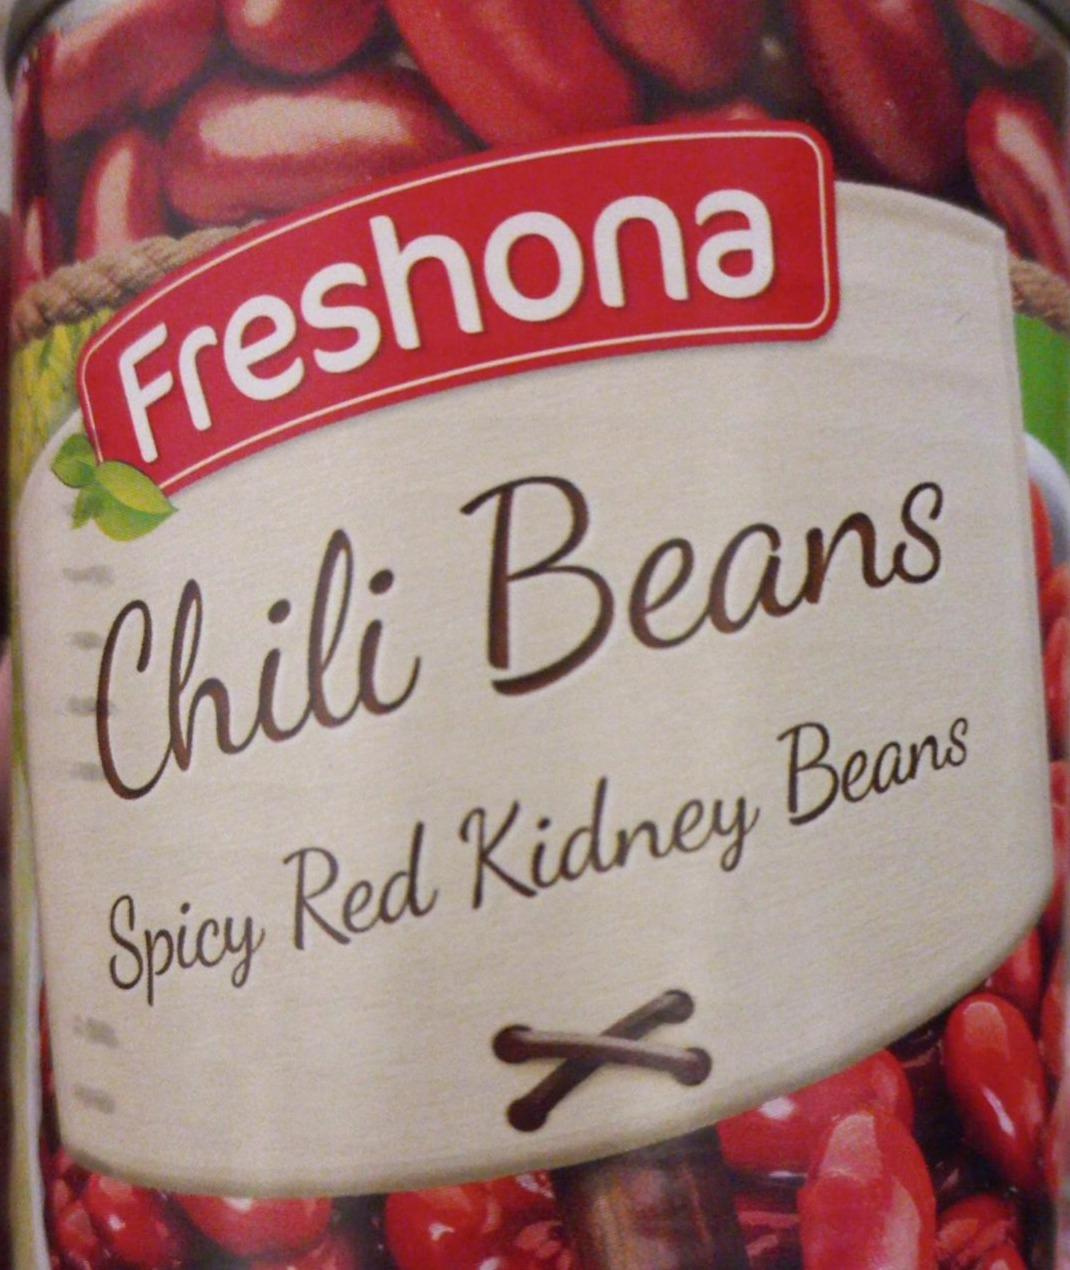 Фото - Chilli Beans Spicy Red Kidney Beans Freshona